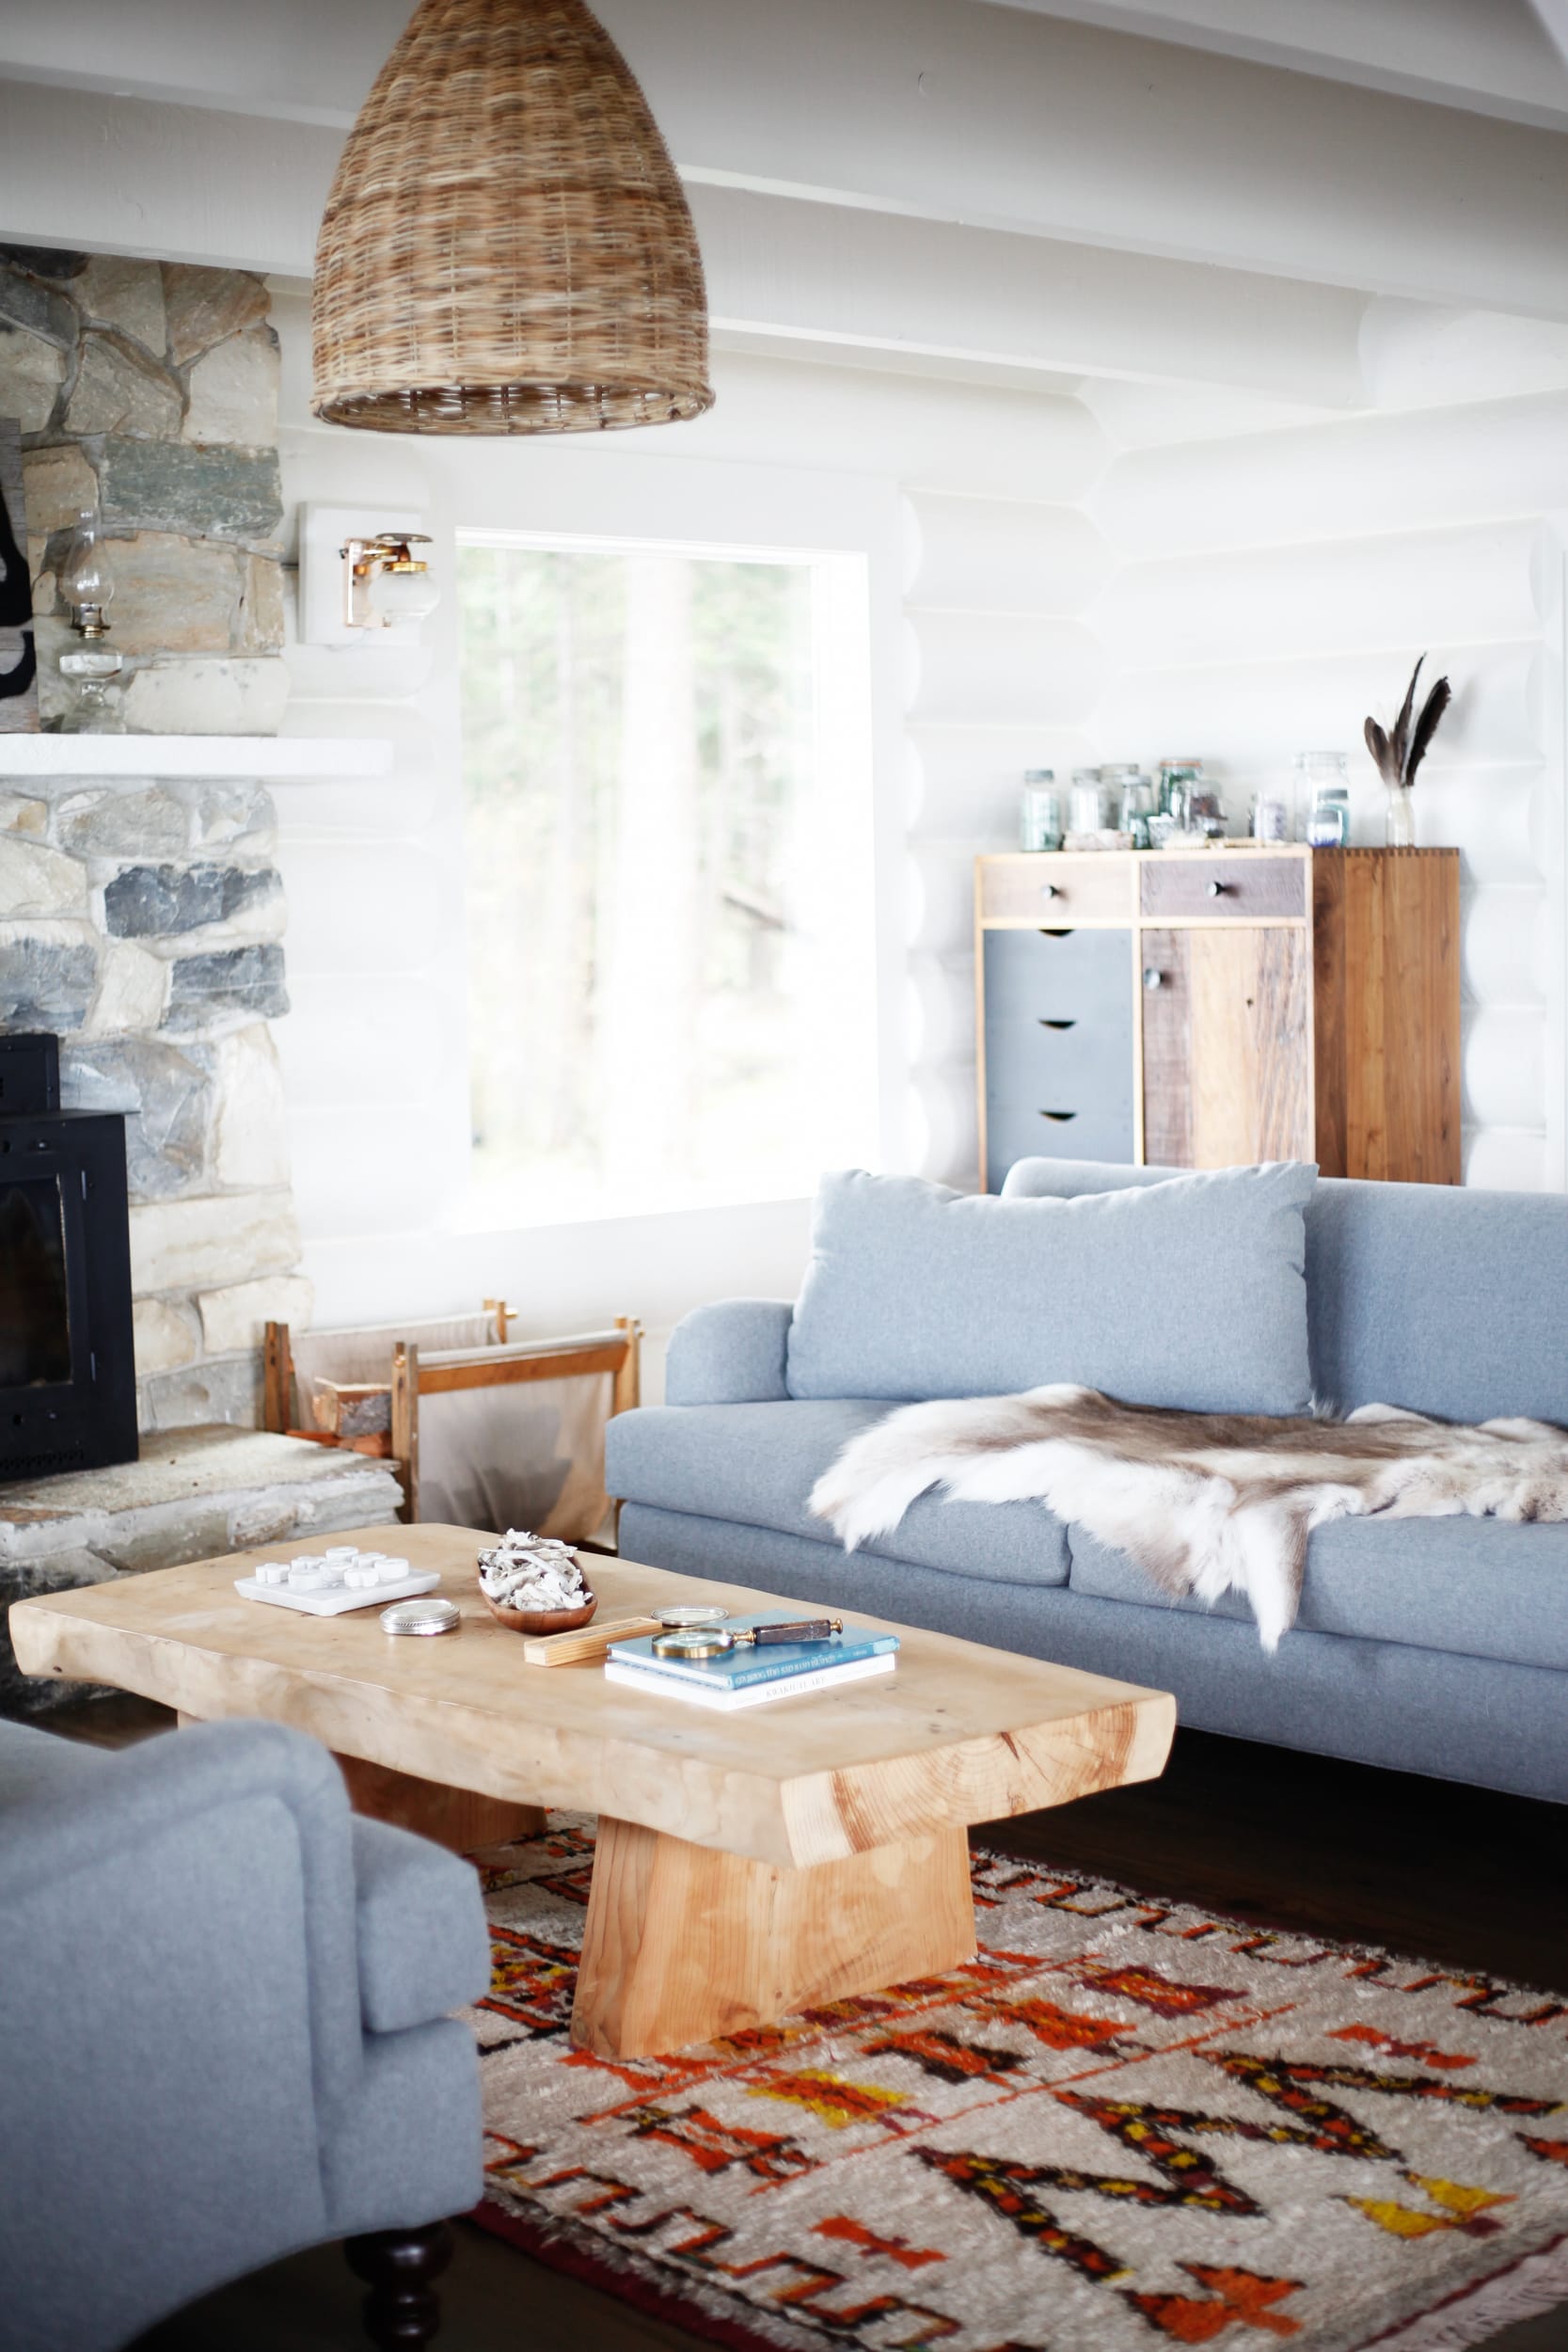 Classic couches with vintage elements